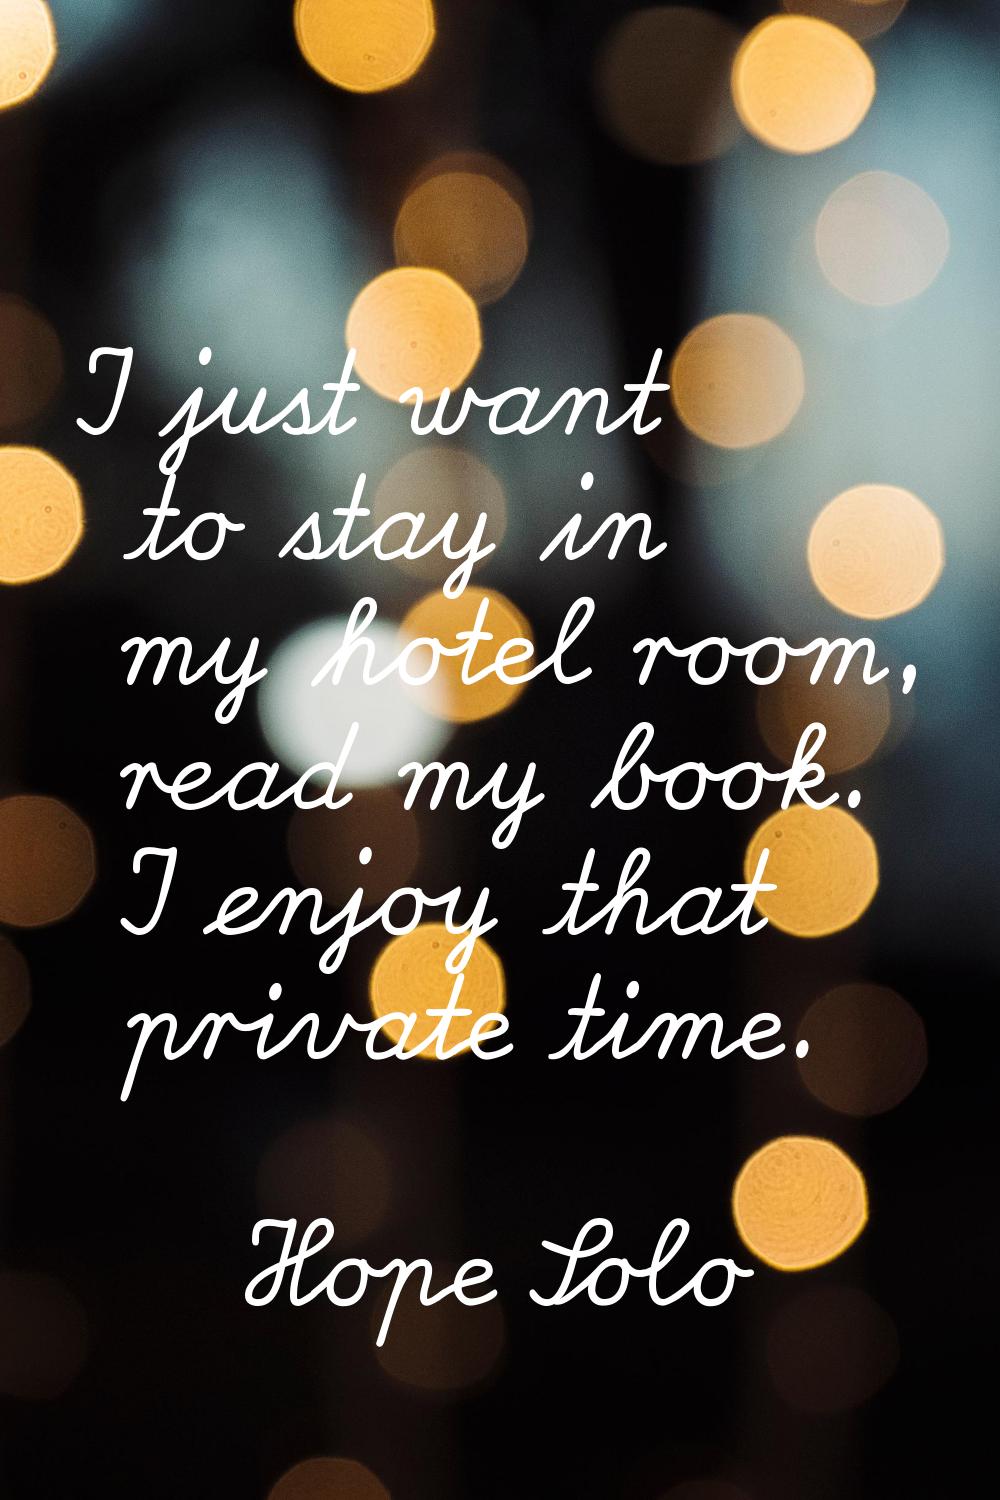 I just want to stay in my hotel room, read my book. I enjoy that private time.